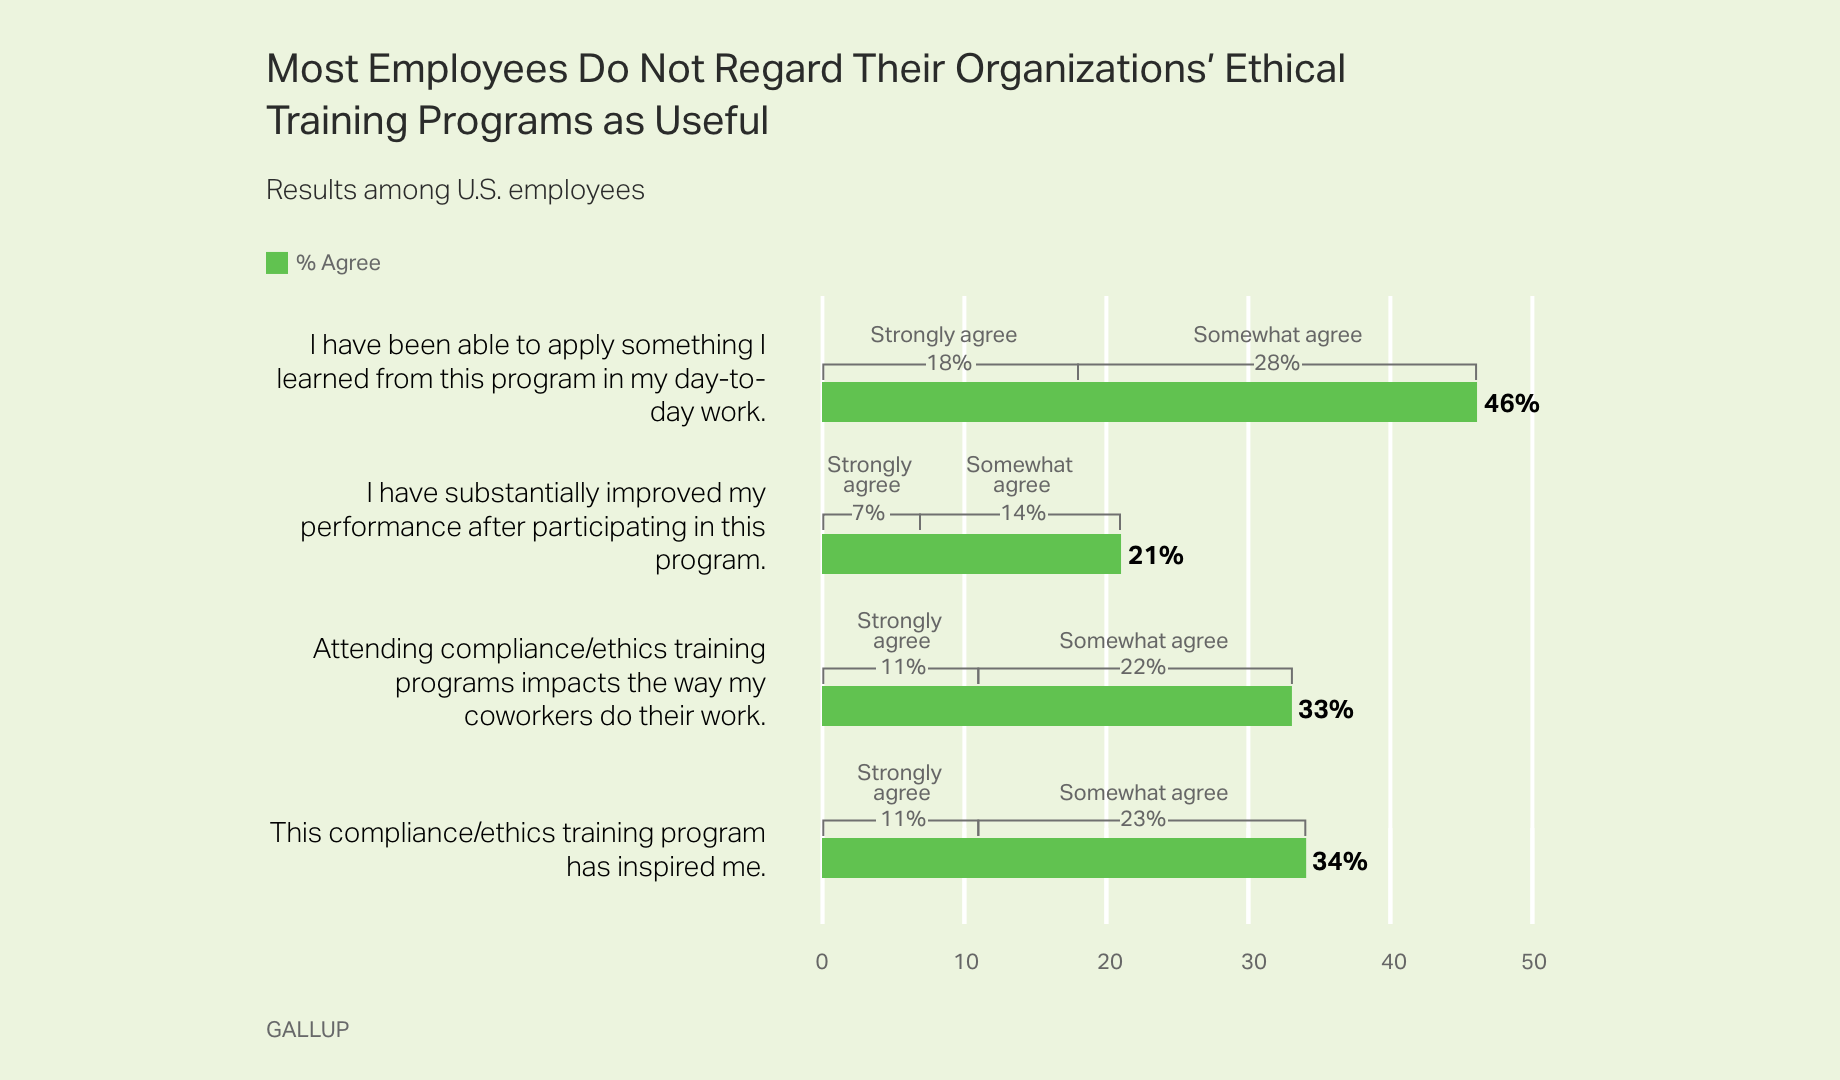 Bar graph. Most employees do not regard their organizations' ethical training programs as useful.